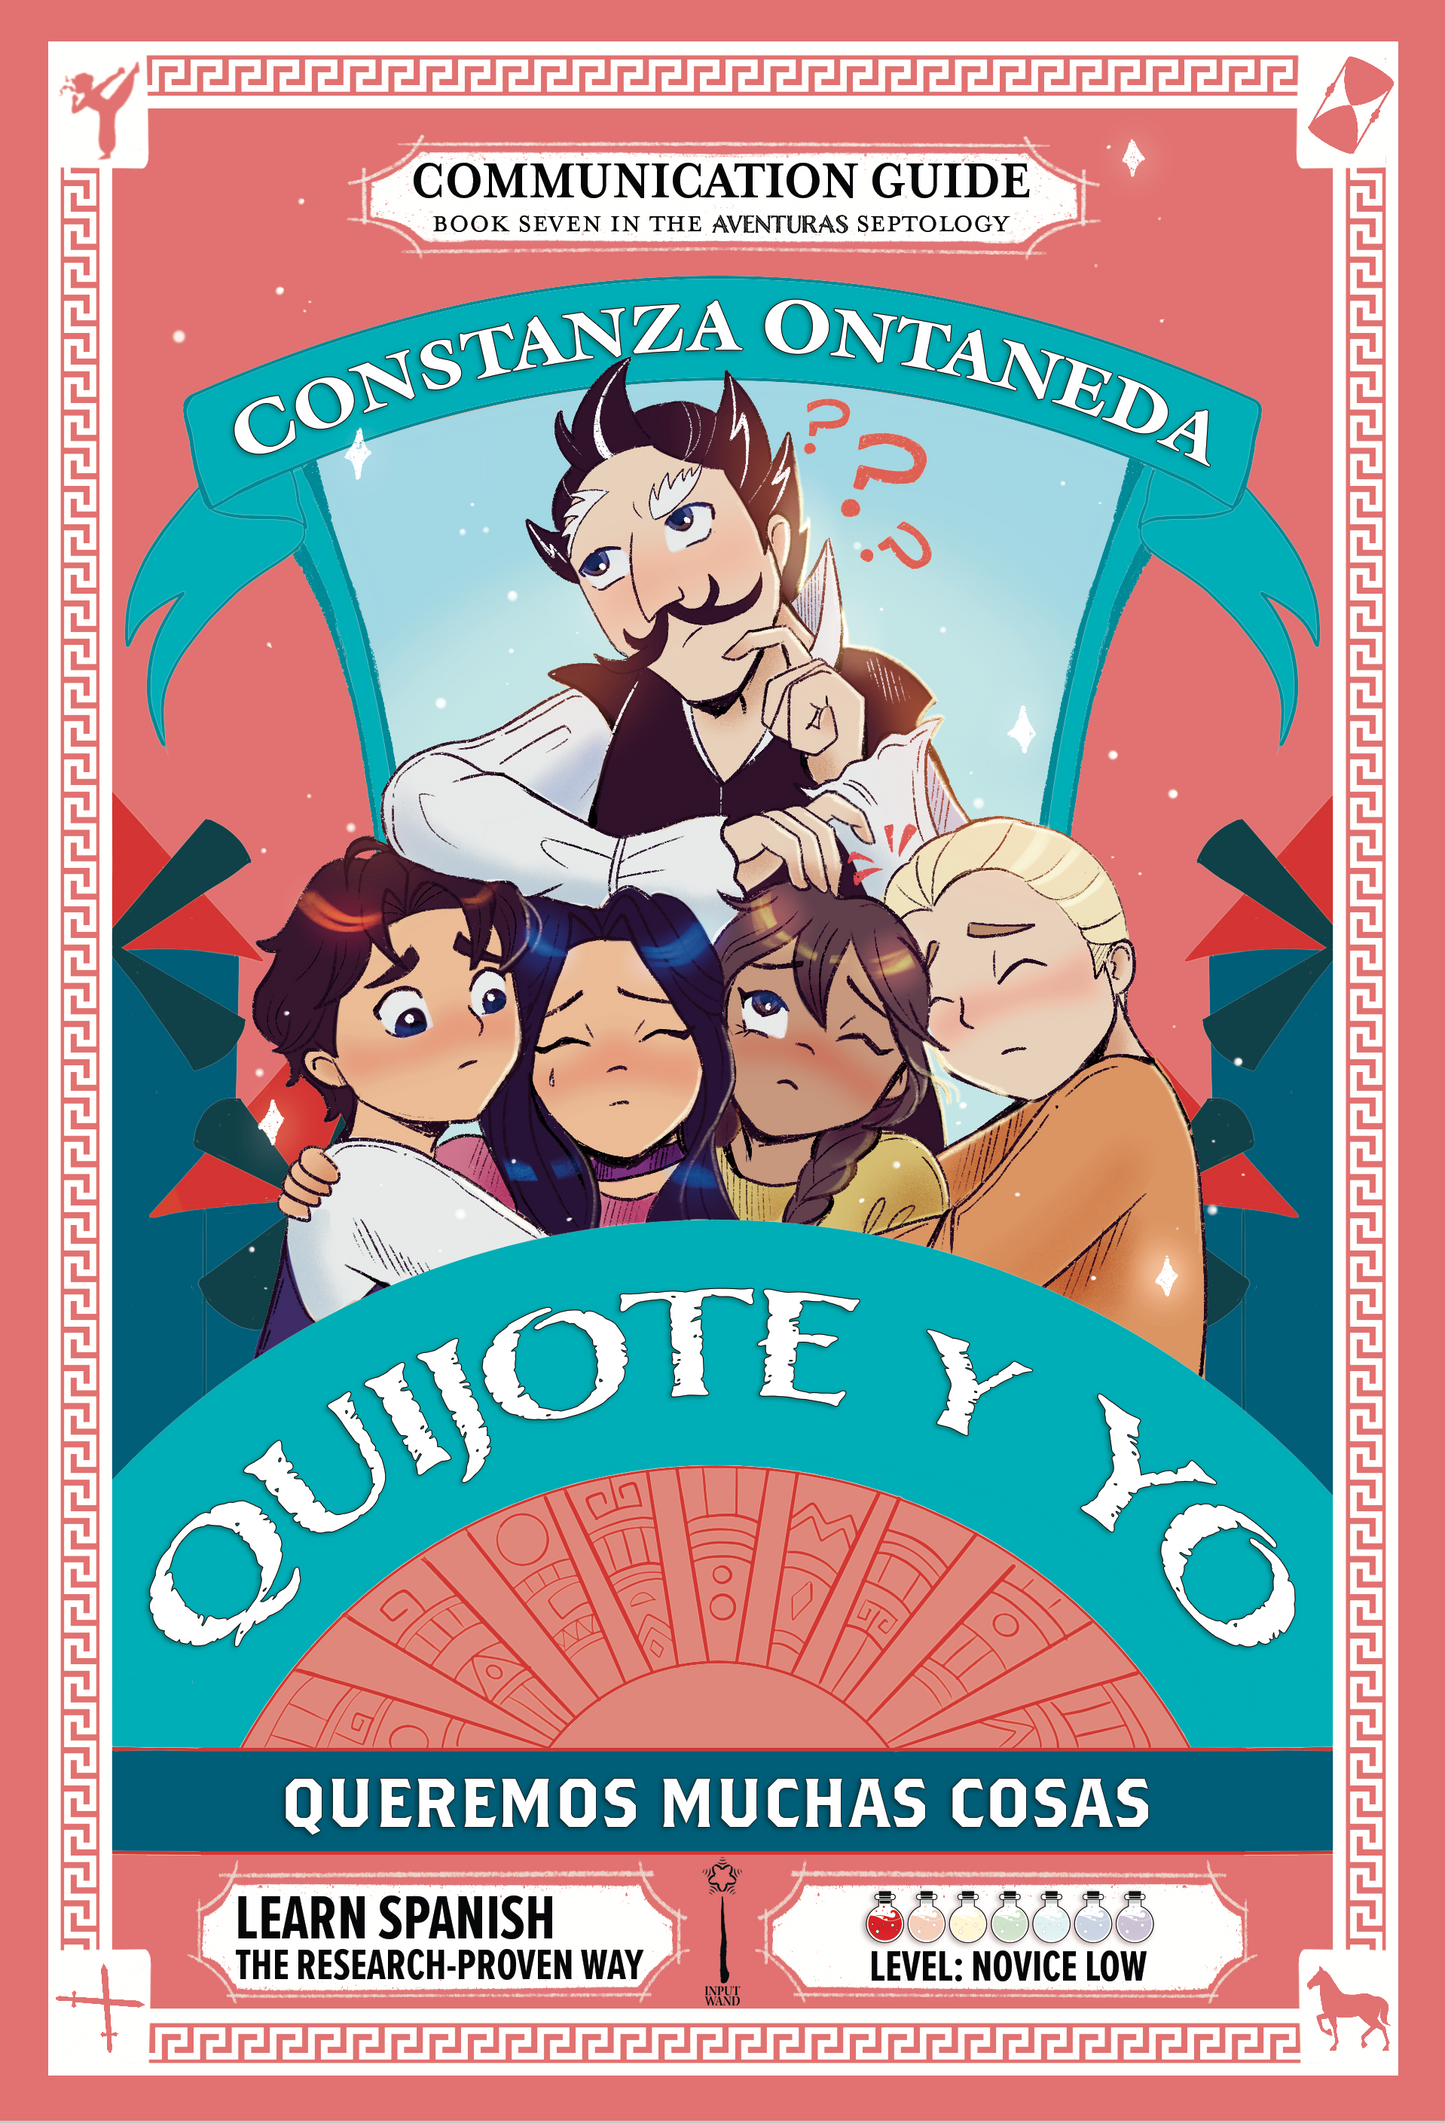 Communication Guide: Quijote y Yo: Queremos Muchas Cosas, Book Seven in the Novice Low "Aventuras" Septology